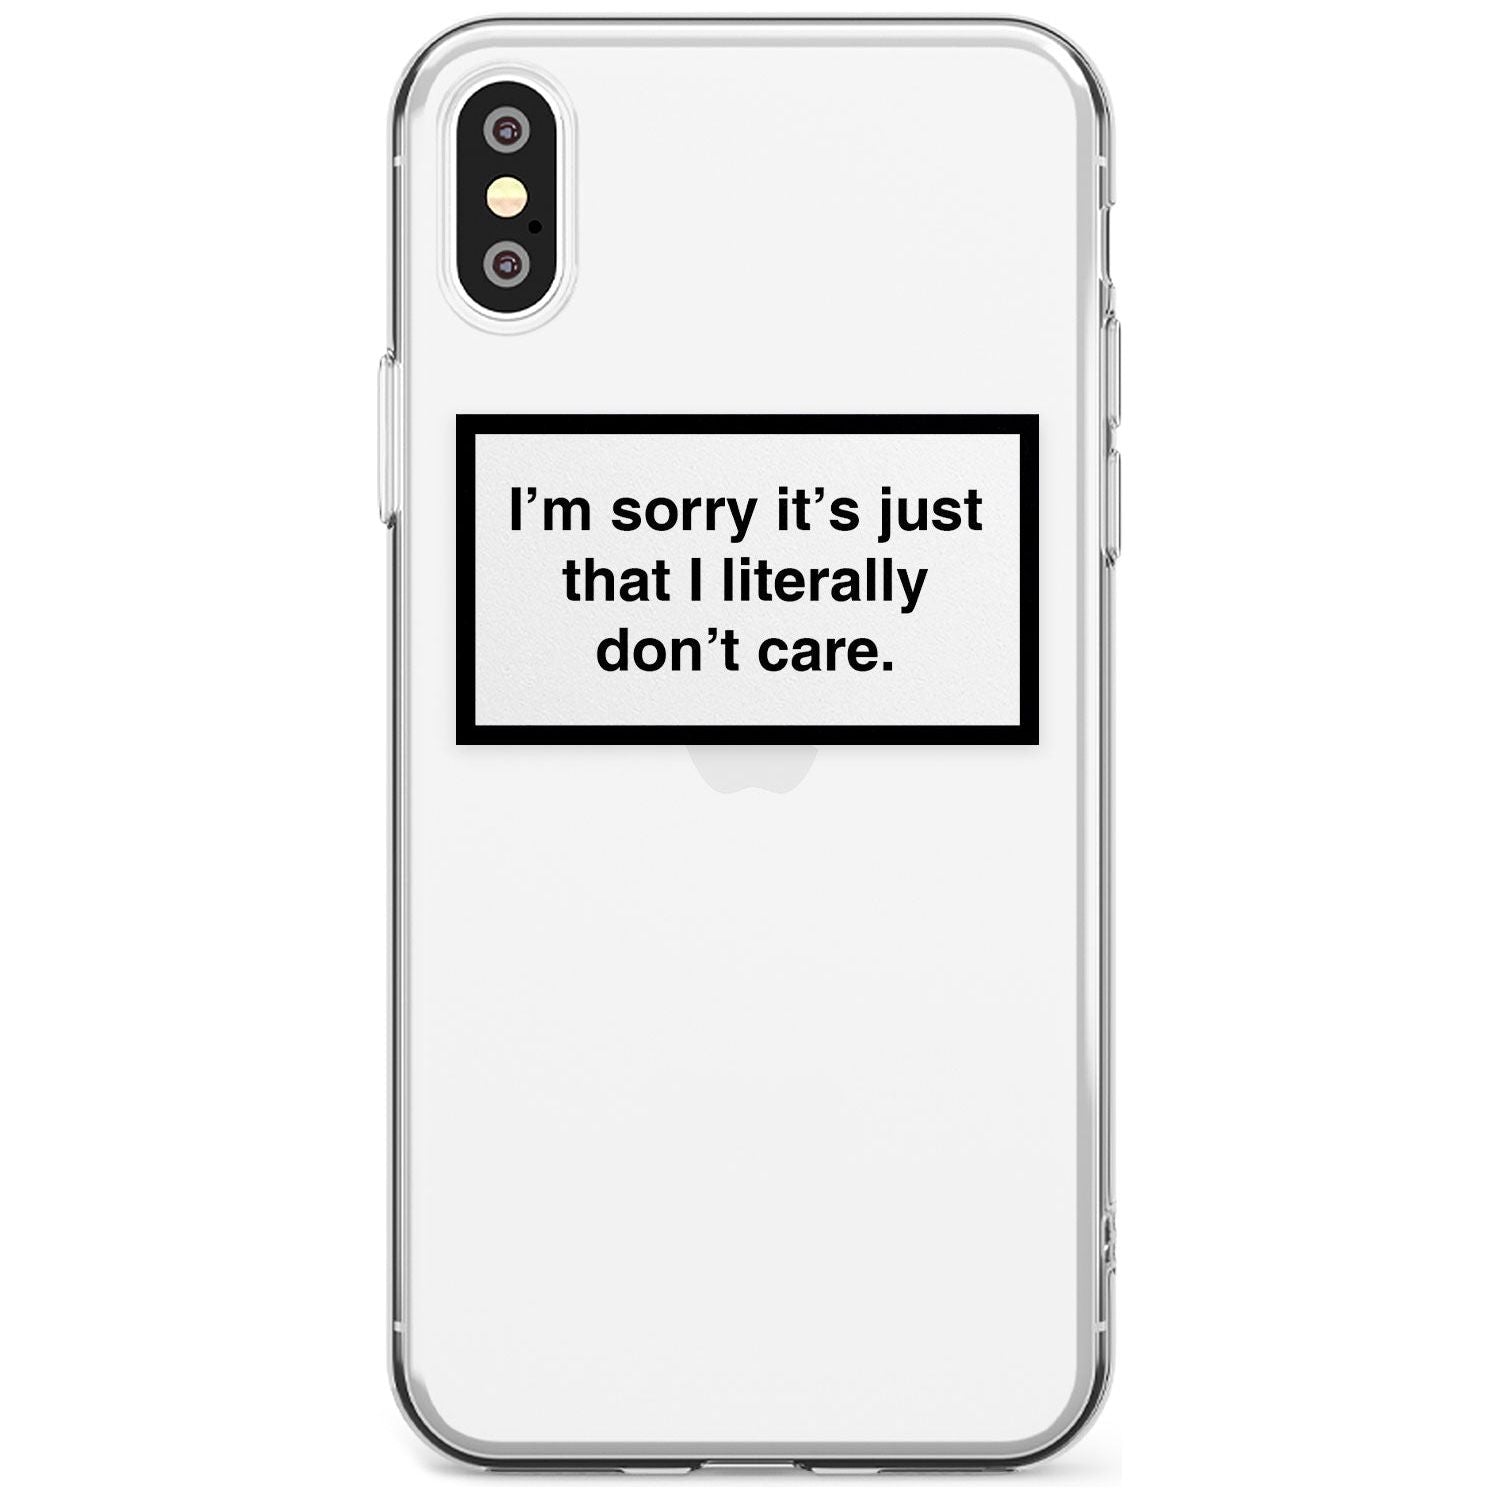 I'm sorry it's just that I literally don't care Black Impact Phone Case for iPhone X XS Max XR